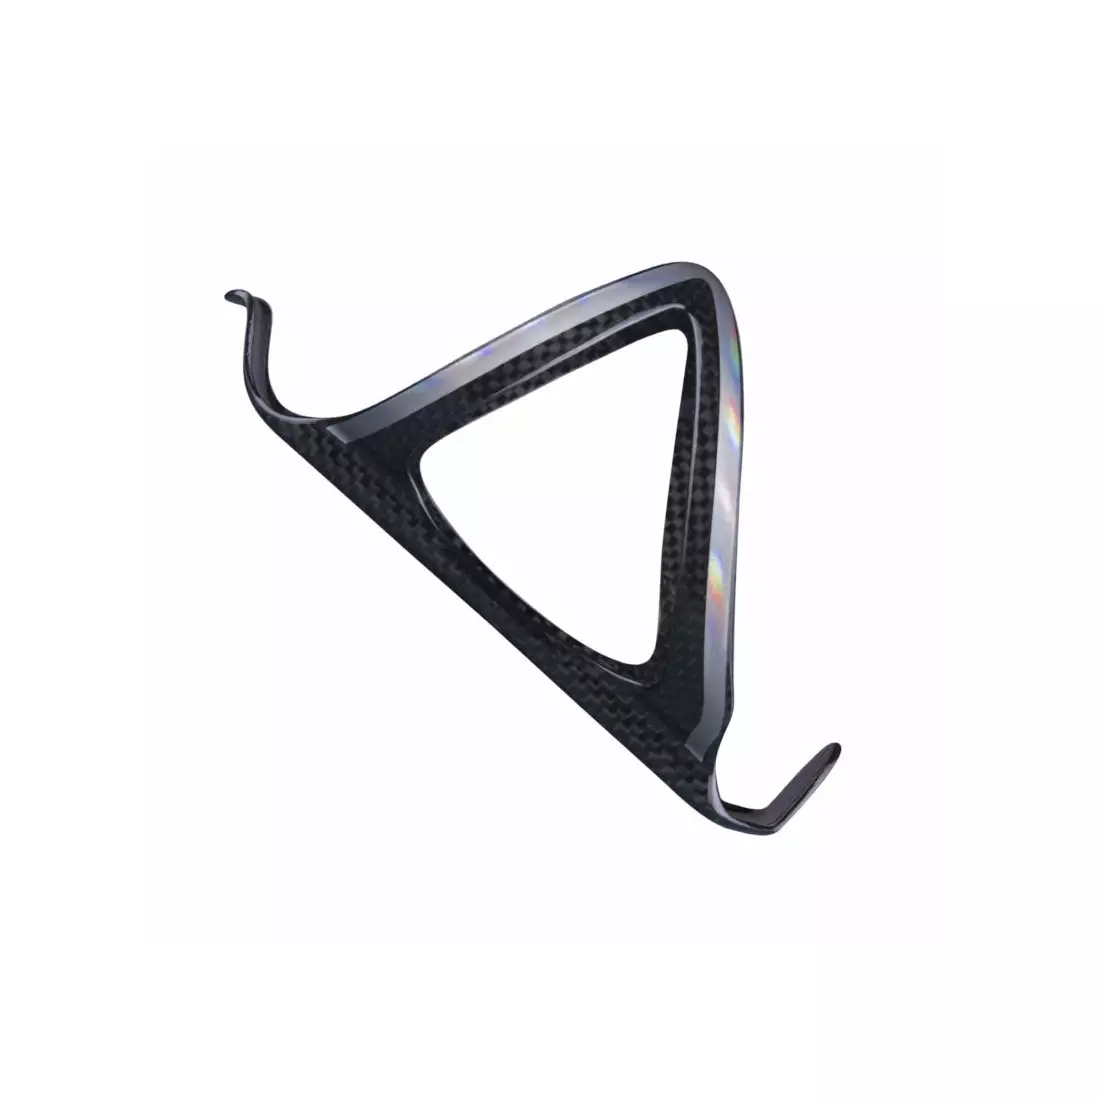 SUPACAZ bicycle water bottle cage FLY CARBON hologram CG-86